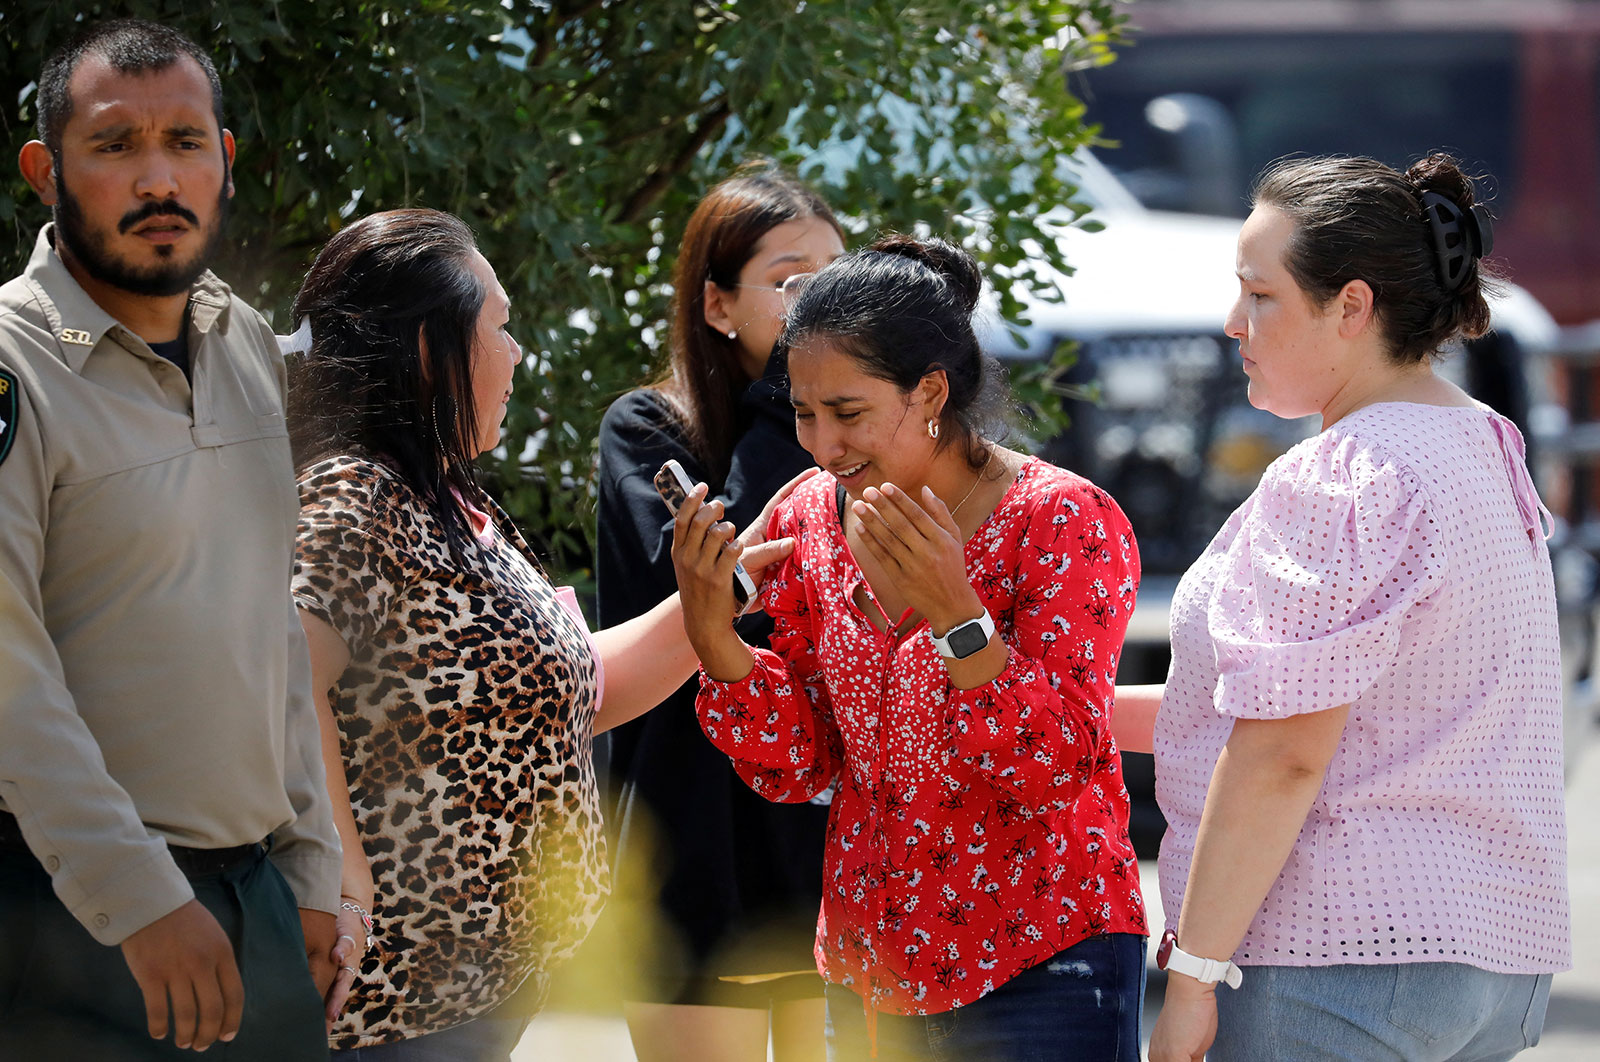 A woman reacts outside the SSGT Willie de Leon Civic Center, where students had been transported from Robb Elementary School after a shooting, in Uvalde, Texas, on May 24.